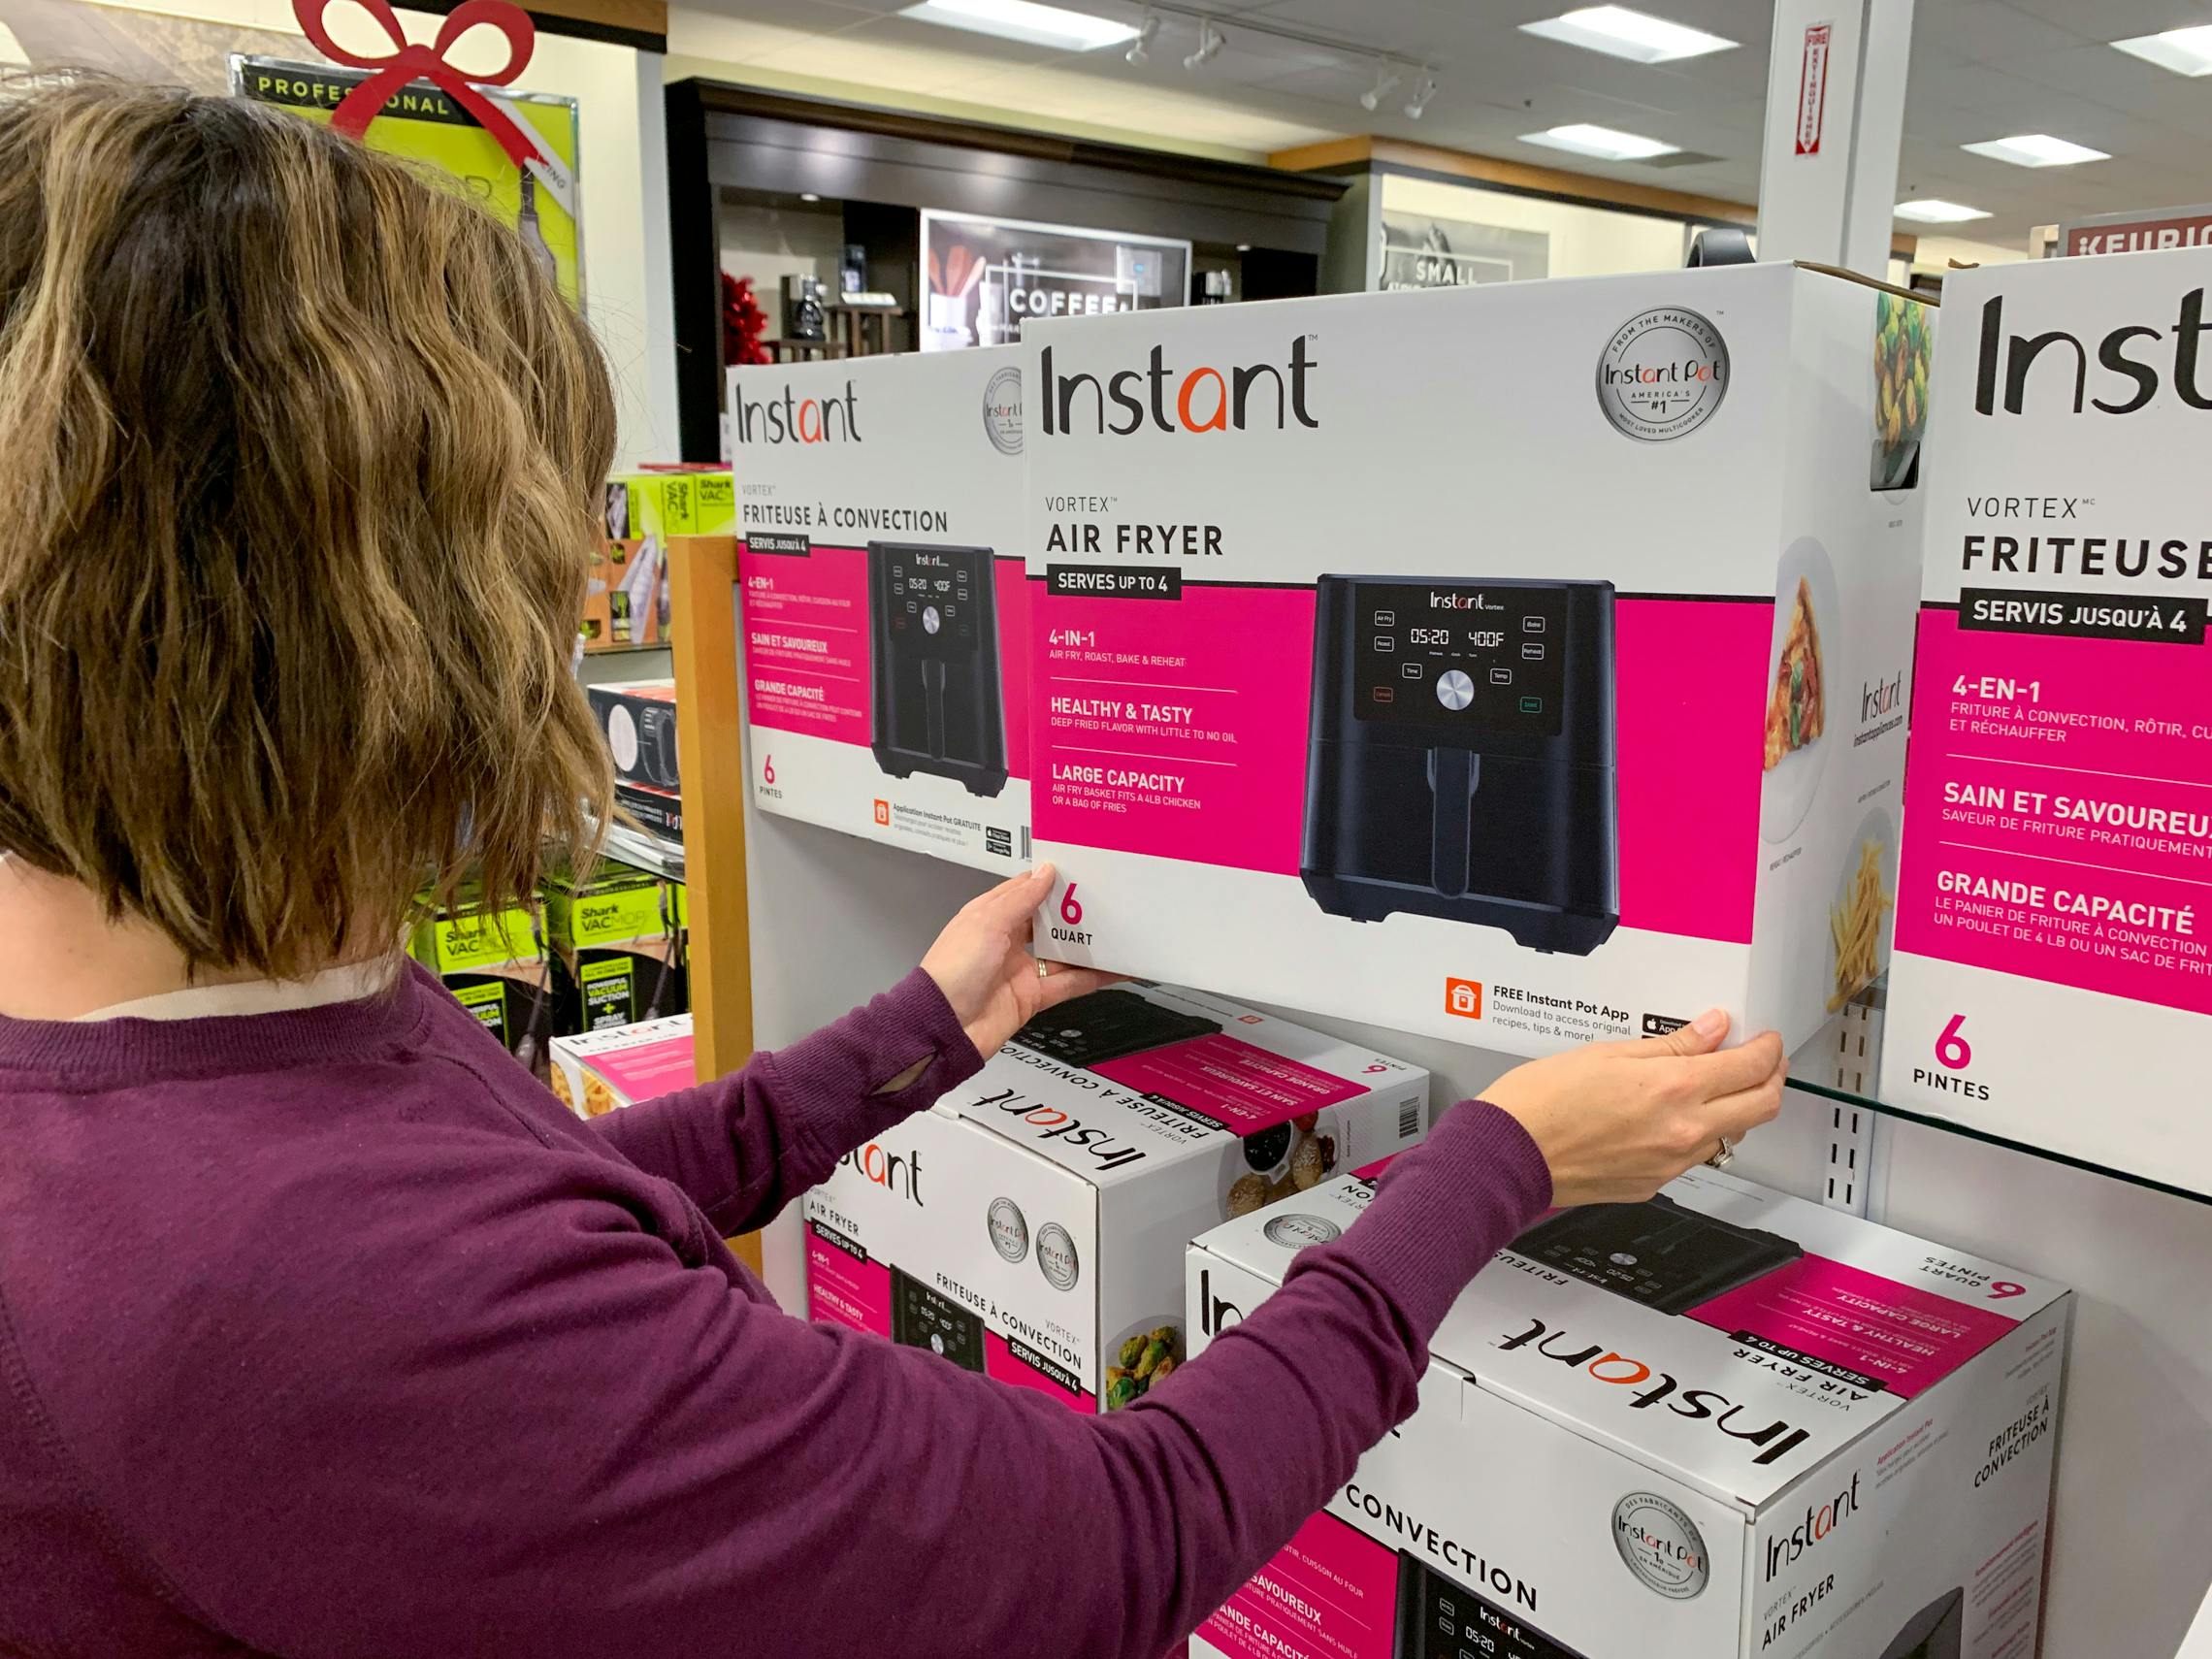 Woman pulling an Instant Air Fryer off the shelf in a store